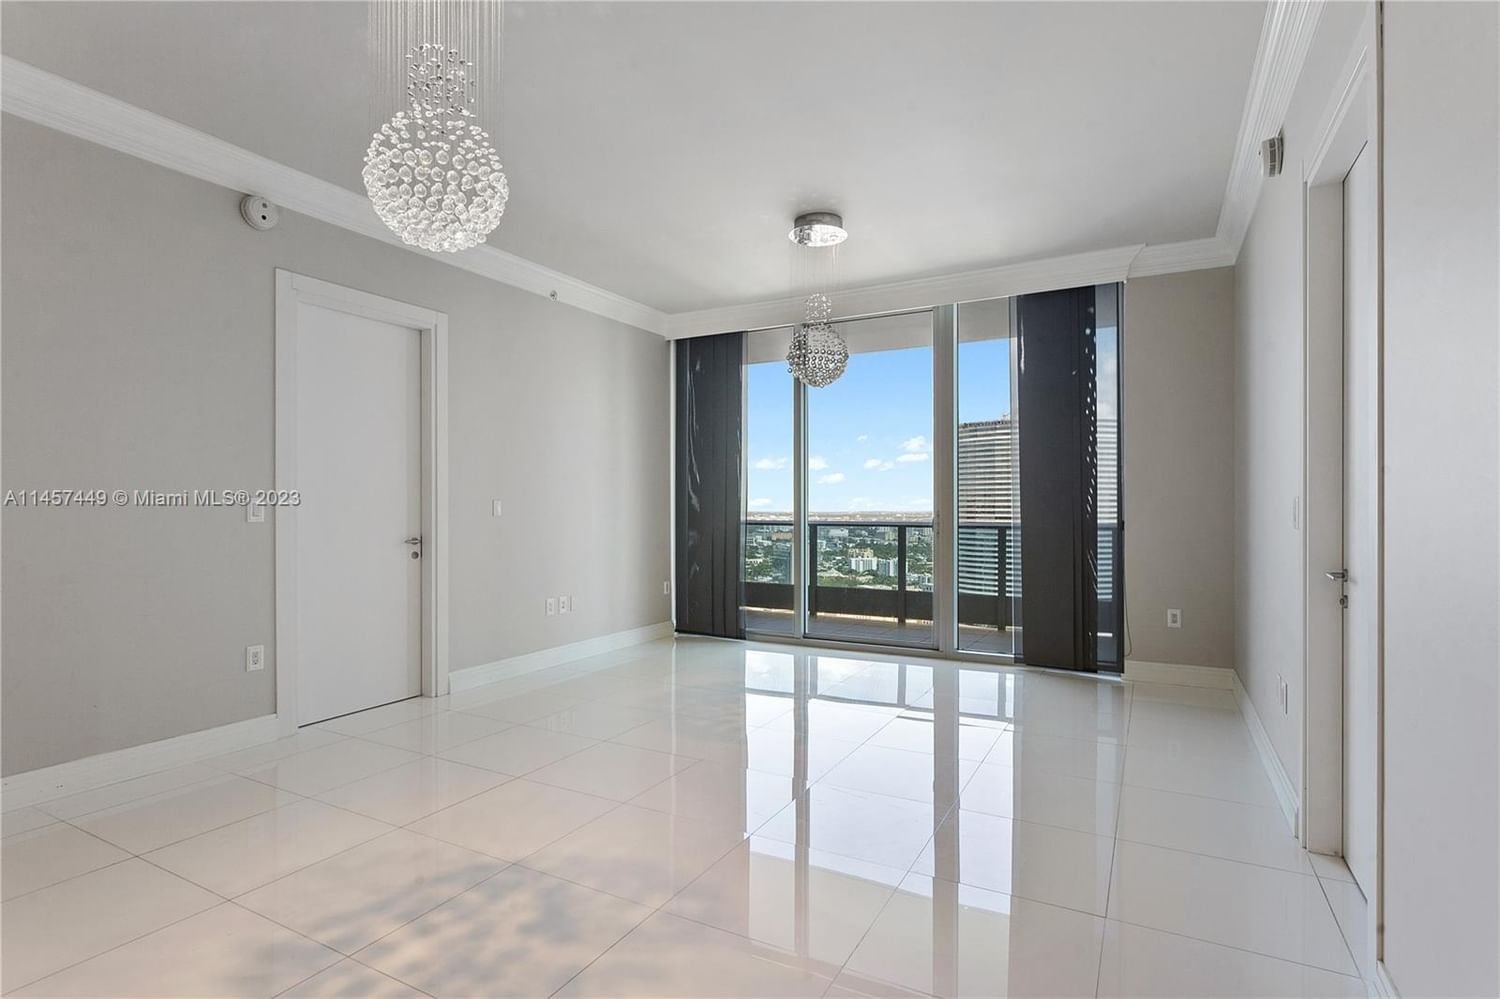 Real estate property located at 200 Biscayne Boulevard Way #5009, Miami-Dade County, EPIC WEST CONDO, Miami, FL